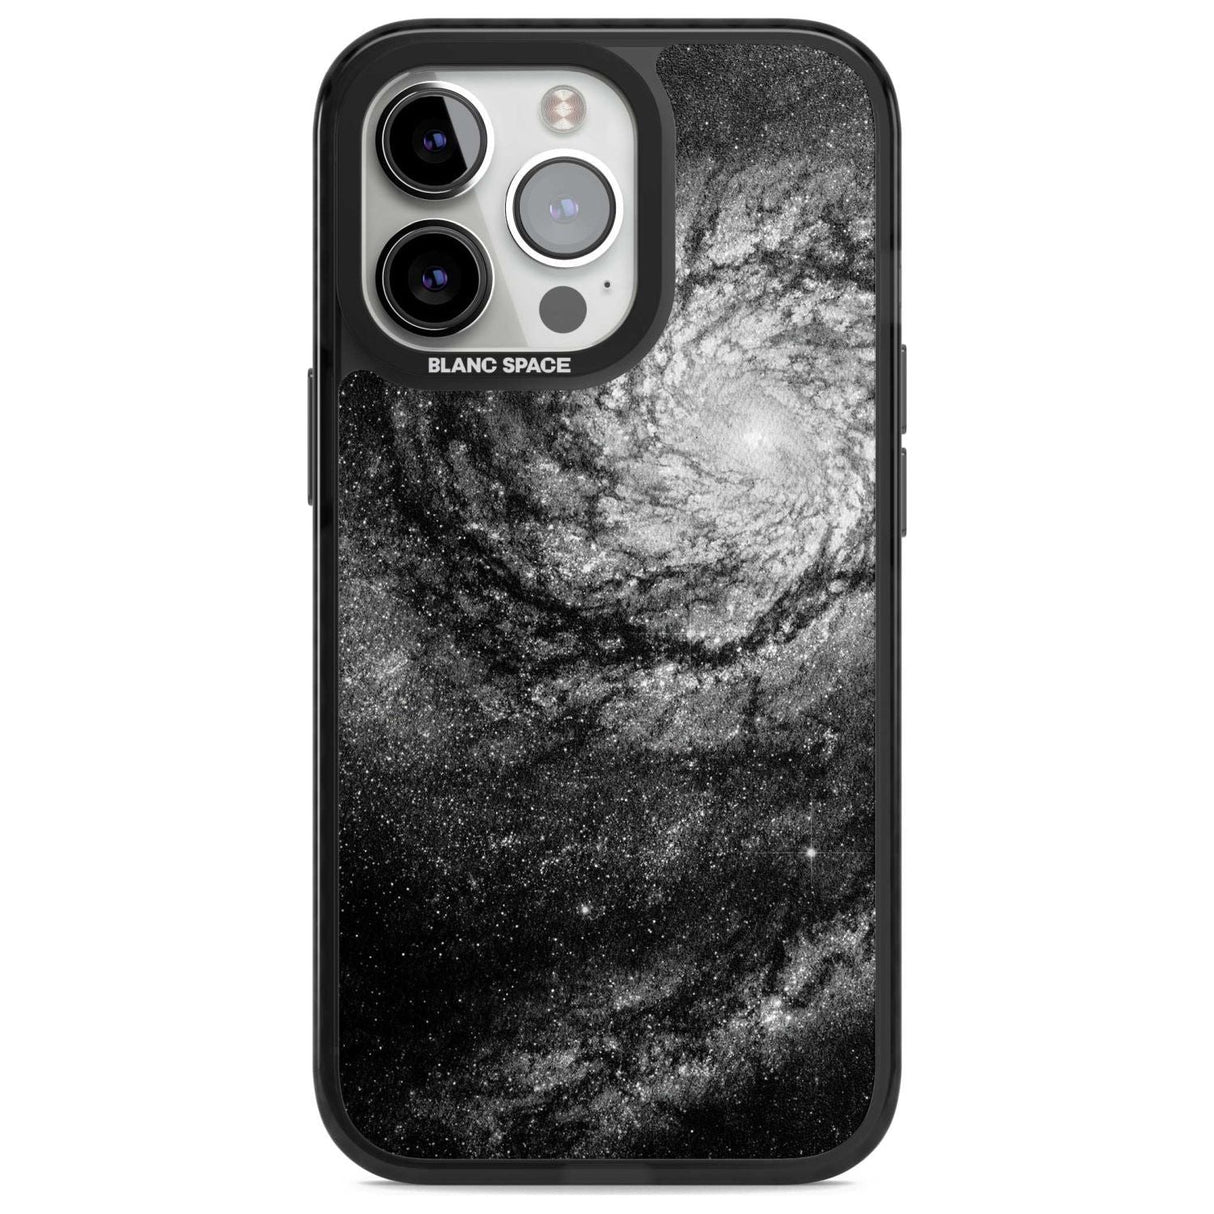 Night Sky Galaxies: Milky Way Galaxy Phone Case iPhone 15 Pro / Magsafe Black Impact Case,iPhone 15 Pro Max / Magsafe Black Impact Case,iPhone 14 Pro Max / Magsafe Black Impact Case,iPhone 13 Pro / Magsafe Black Impact Case,iPhone 14 Pro / Magsafe Black Impact Case Blanc Space